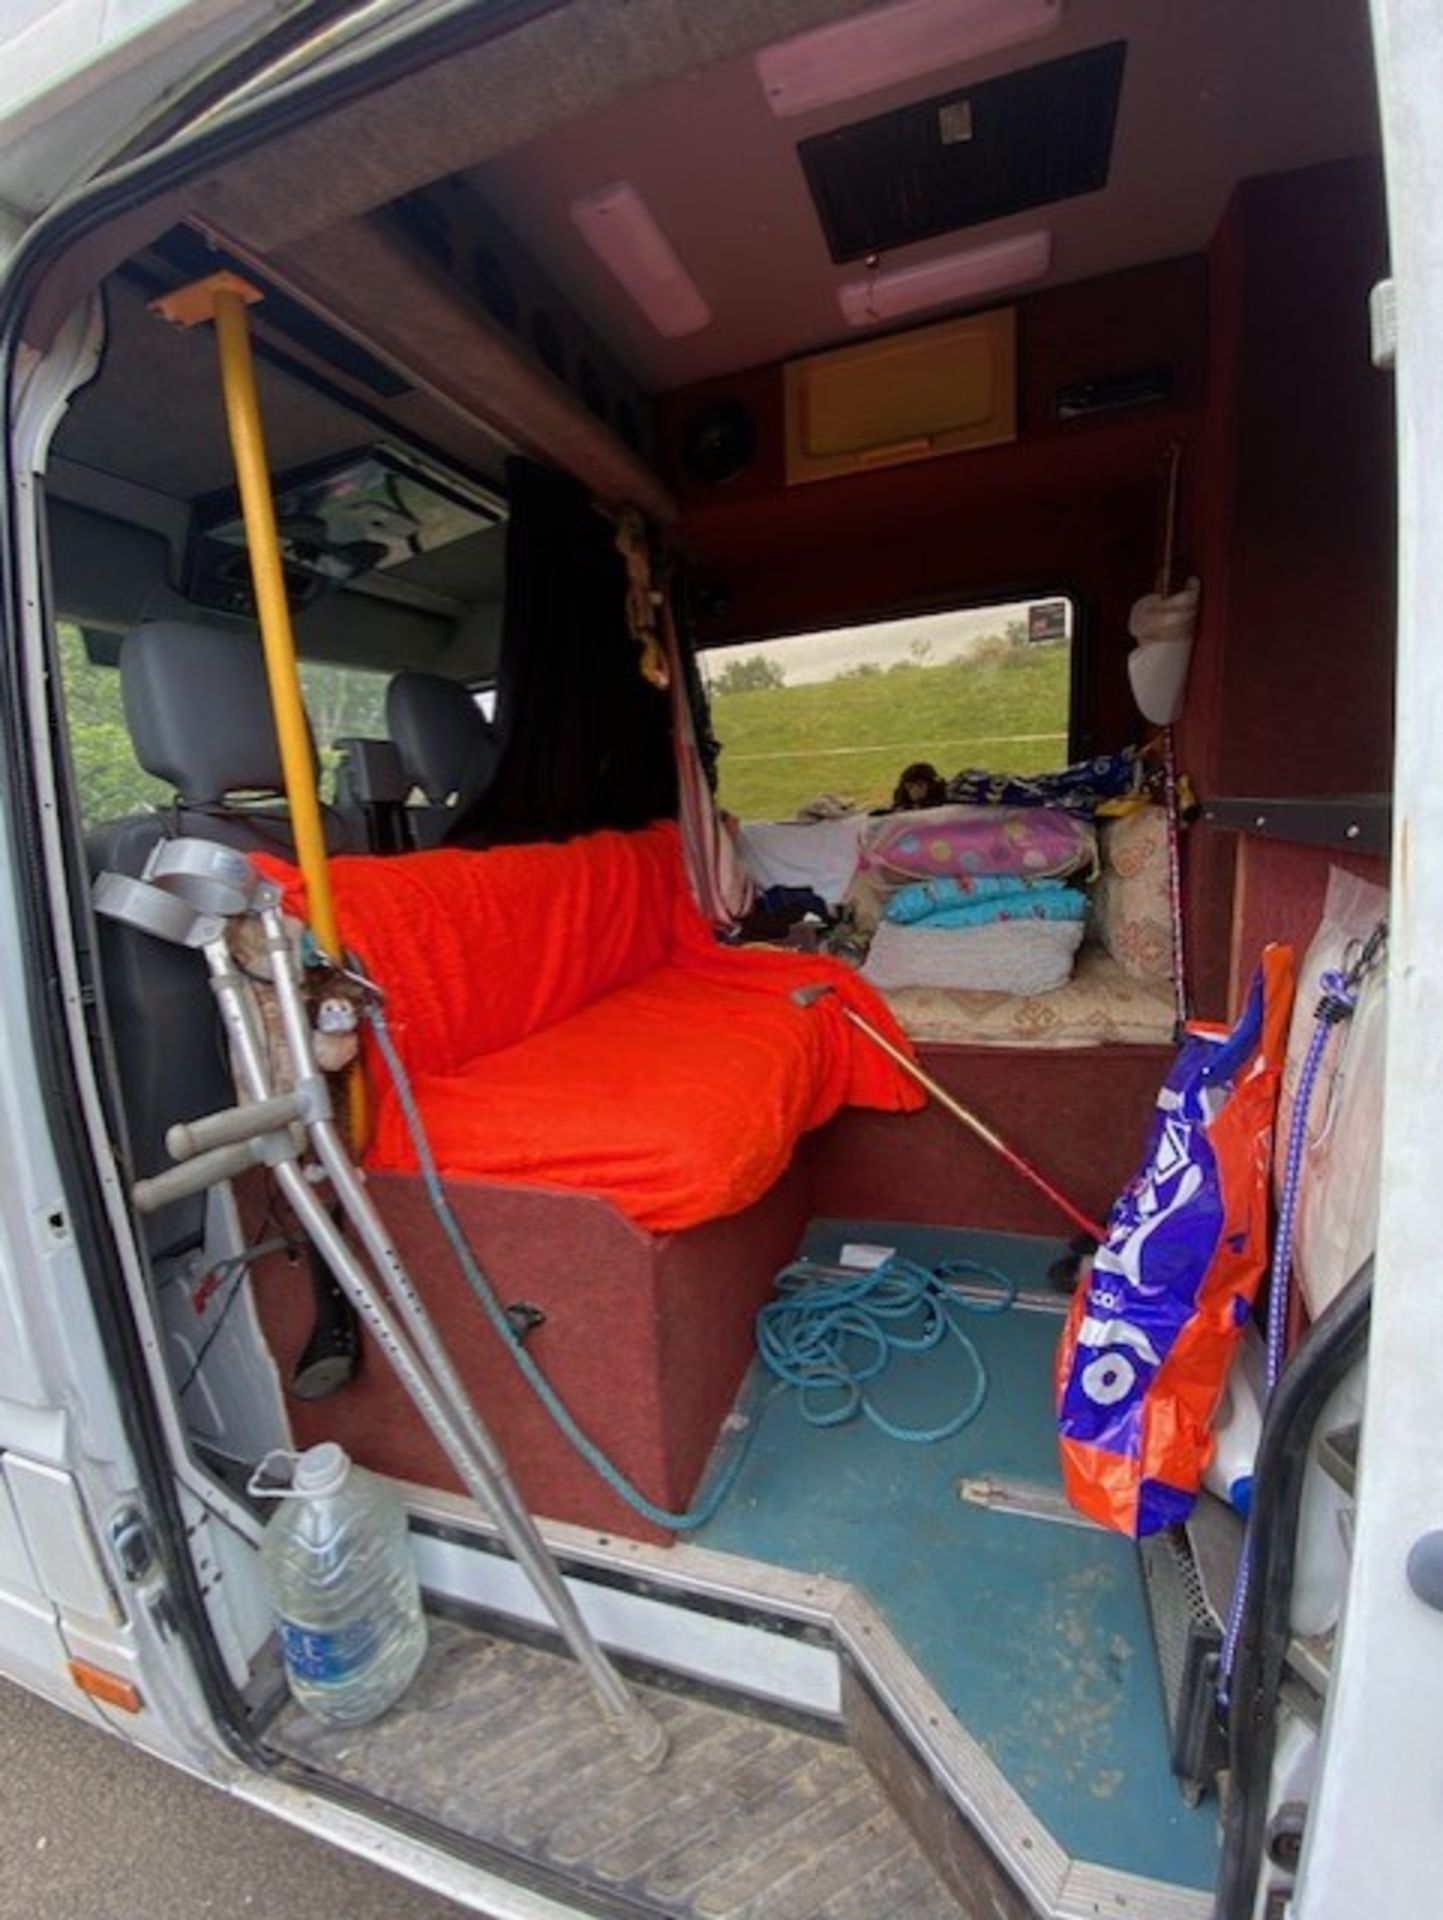 Mercedes 3cdi 2.1 Camper Van , 5ft Kingsize Bed , Seating Area which converts to another double - Image 4 of 6